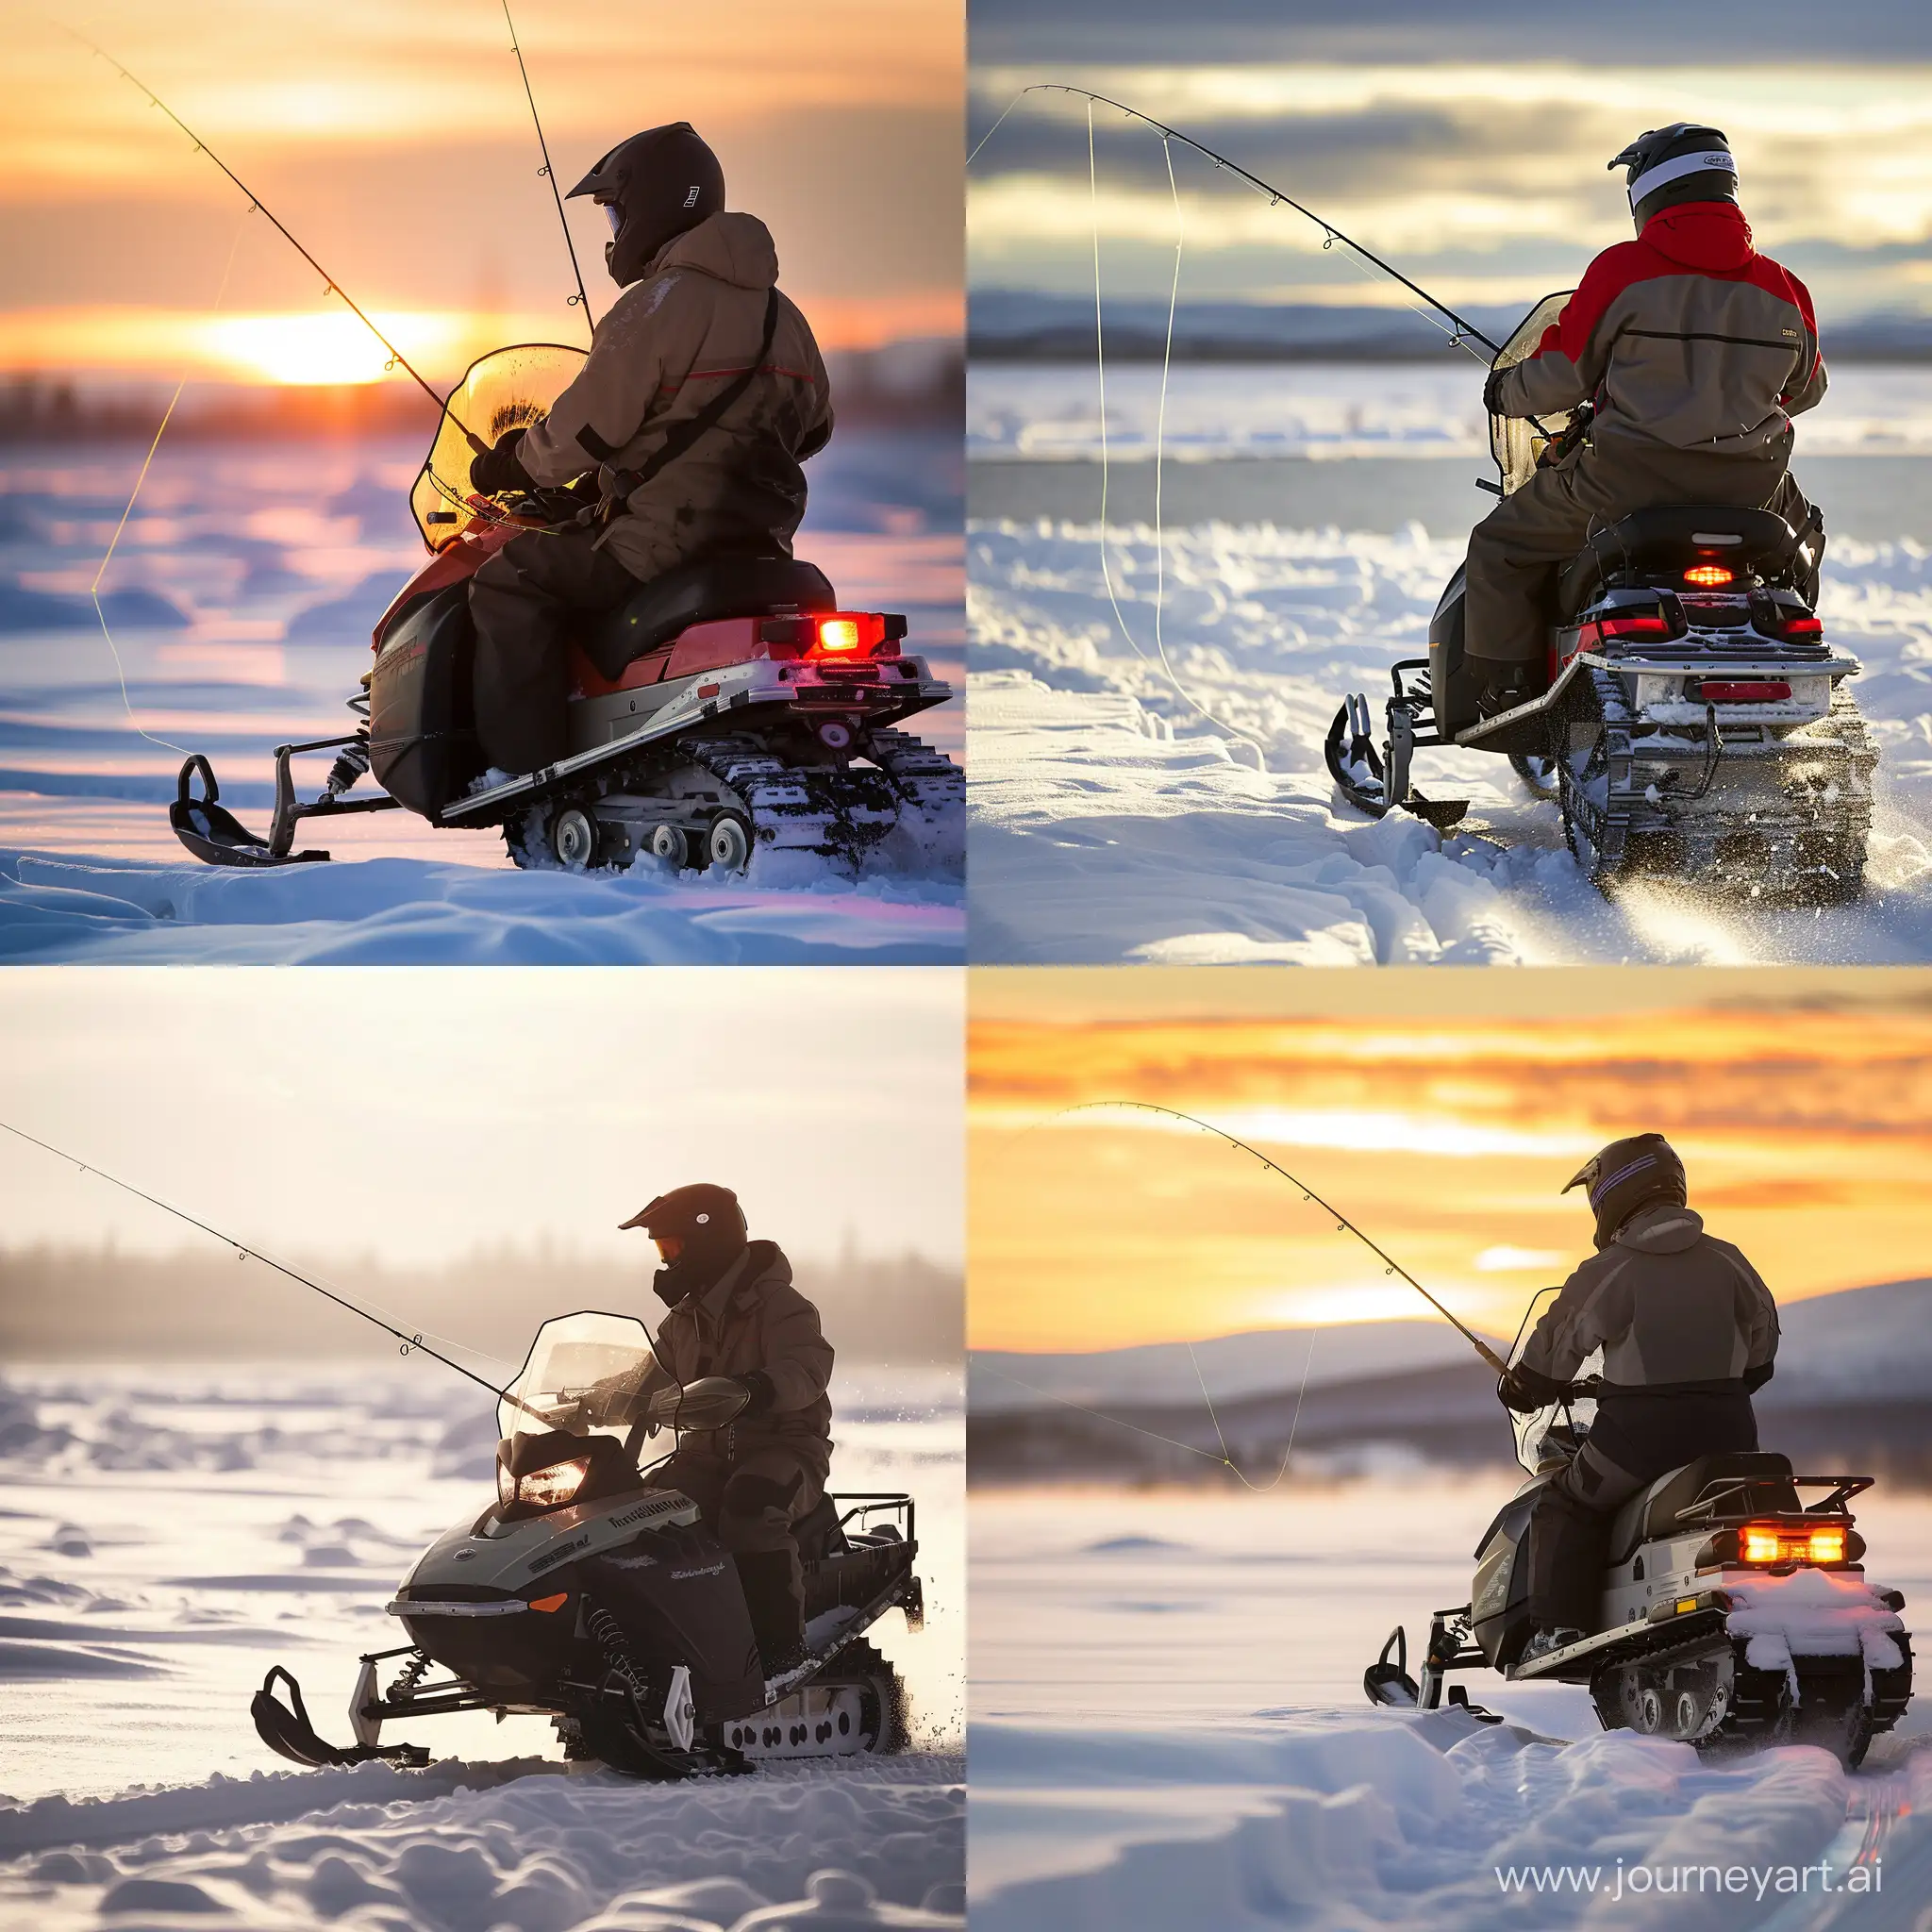 Winter-Fishing-on-a-Snowmobile-Serene-Scene-of-Angling-Amidst-Snowy-Landscape